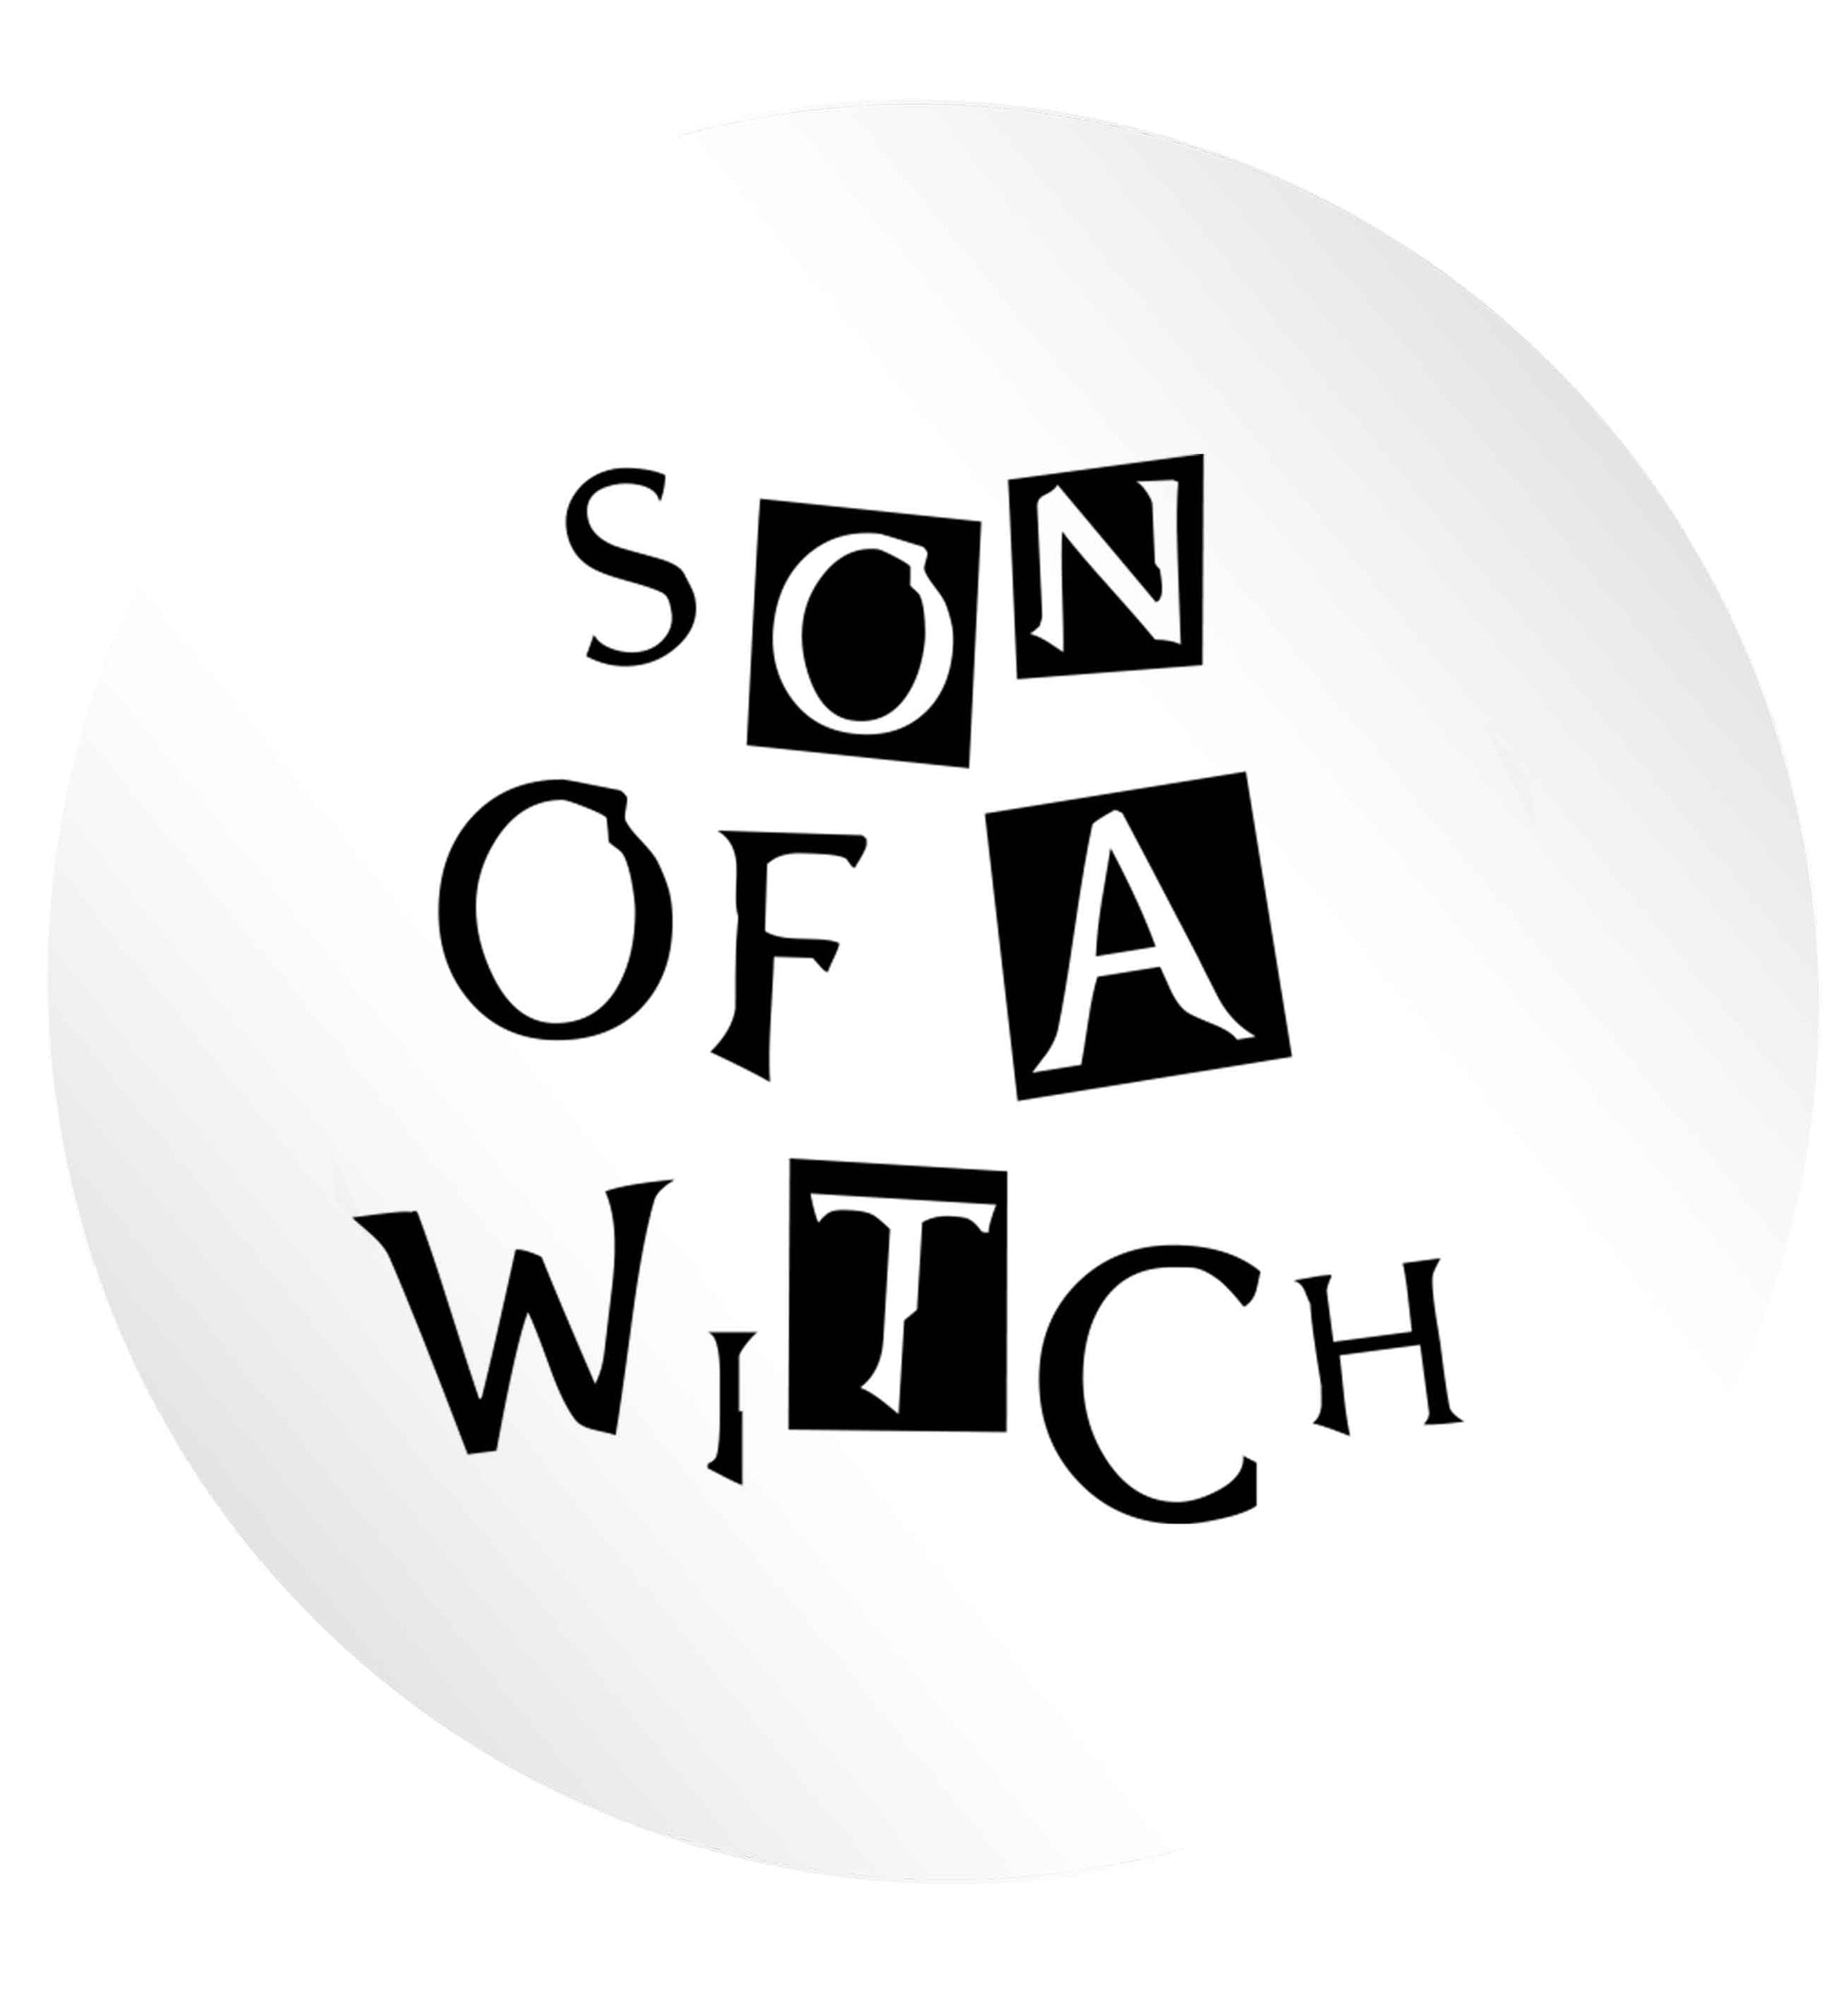 Son of a witch 24 @ 45mm matt circle stickers